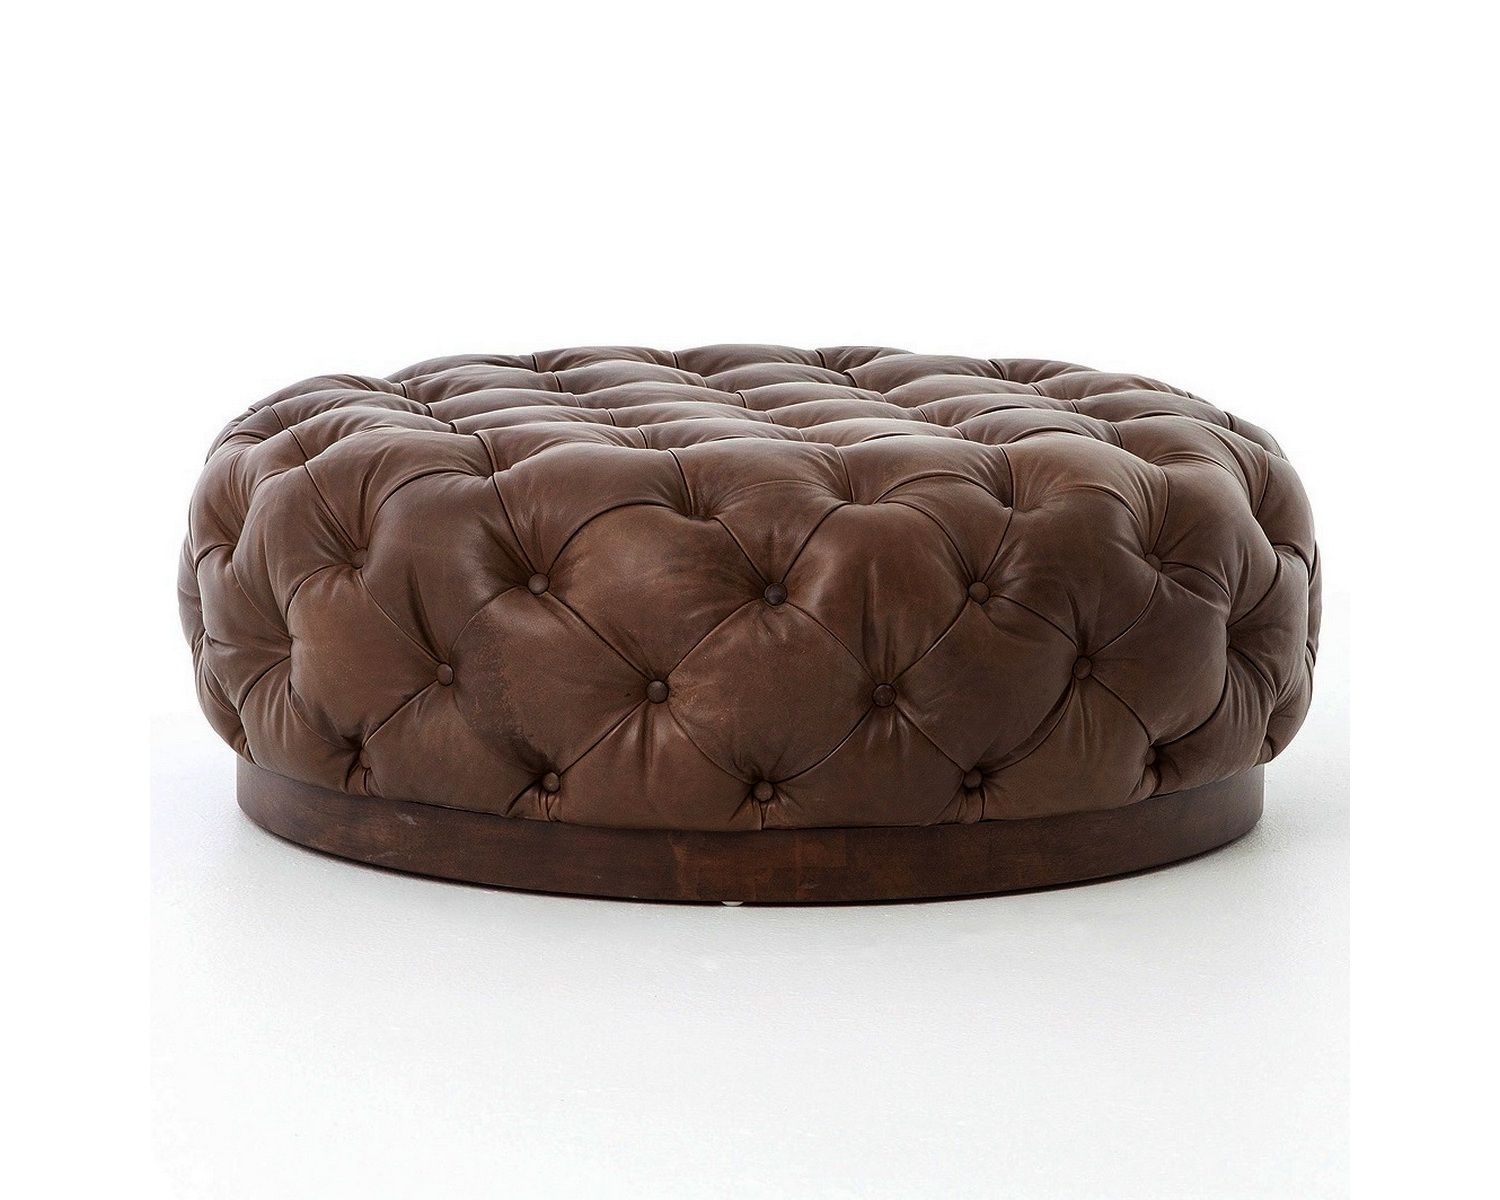 For Cocktail Round Leather Ottoman | Leather Cocktail Ottoman, Wood Throughout Brown Faux Leather Tufted Round Wood Ottomans (View 9 of 20)